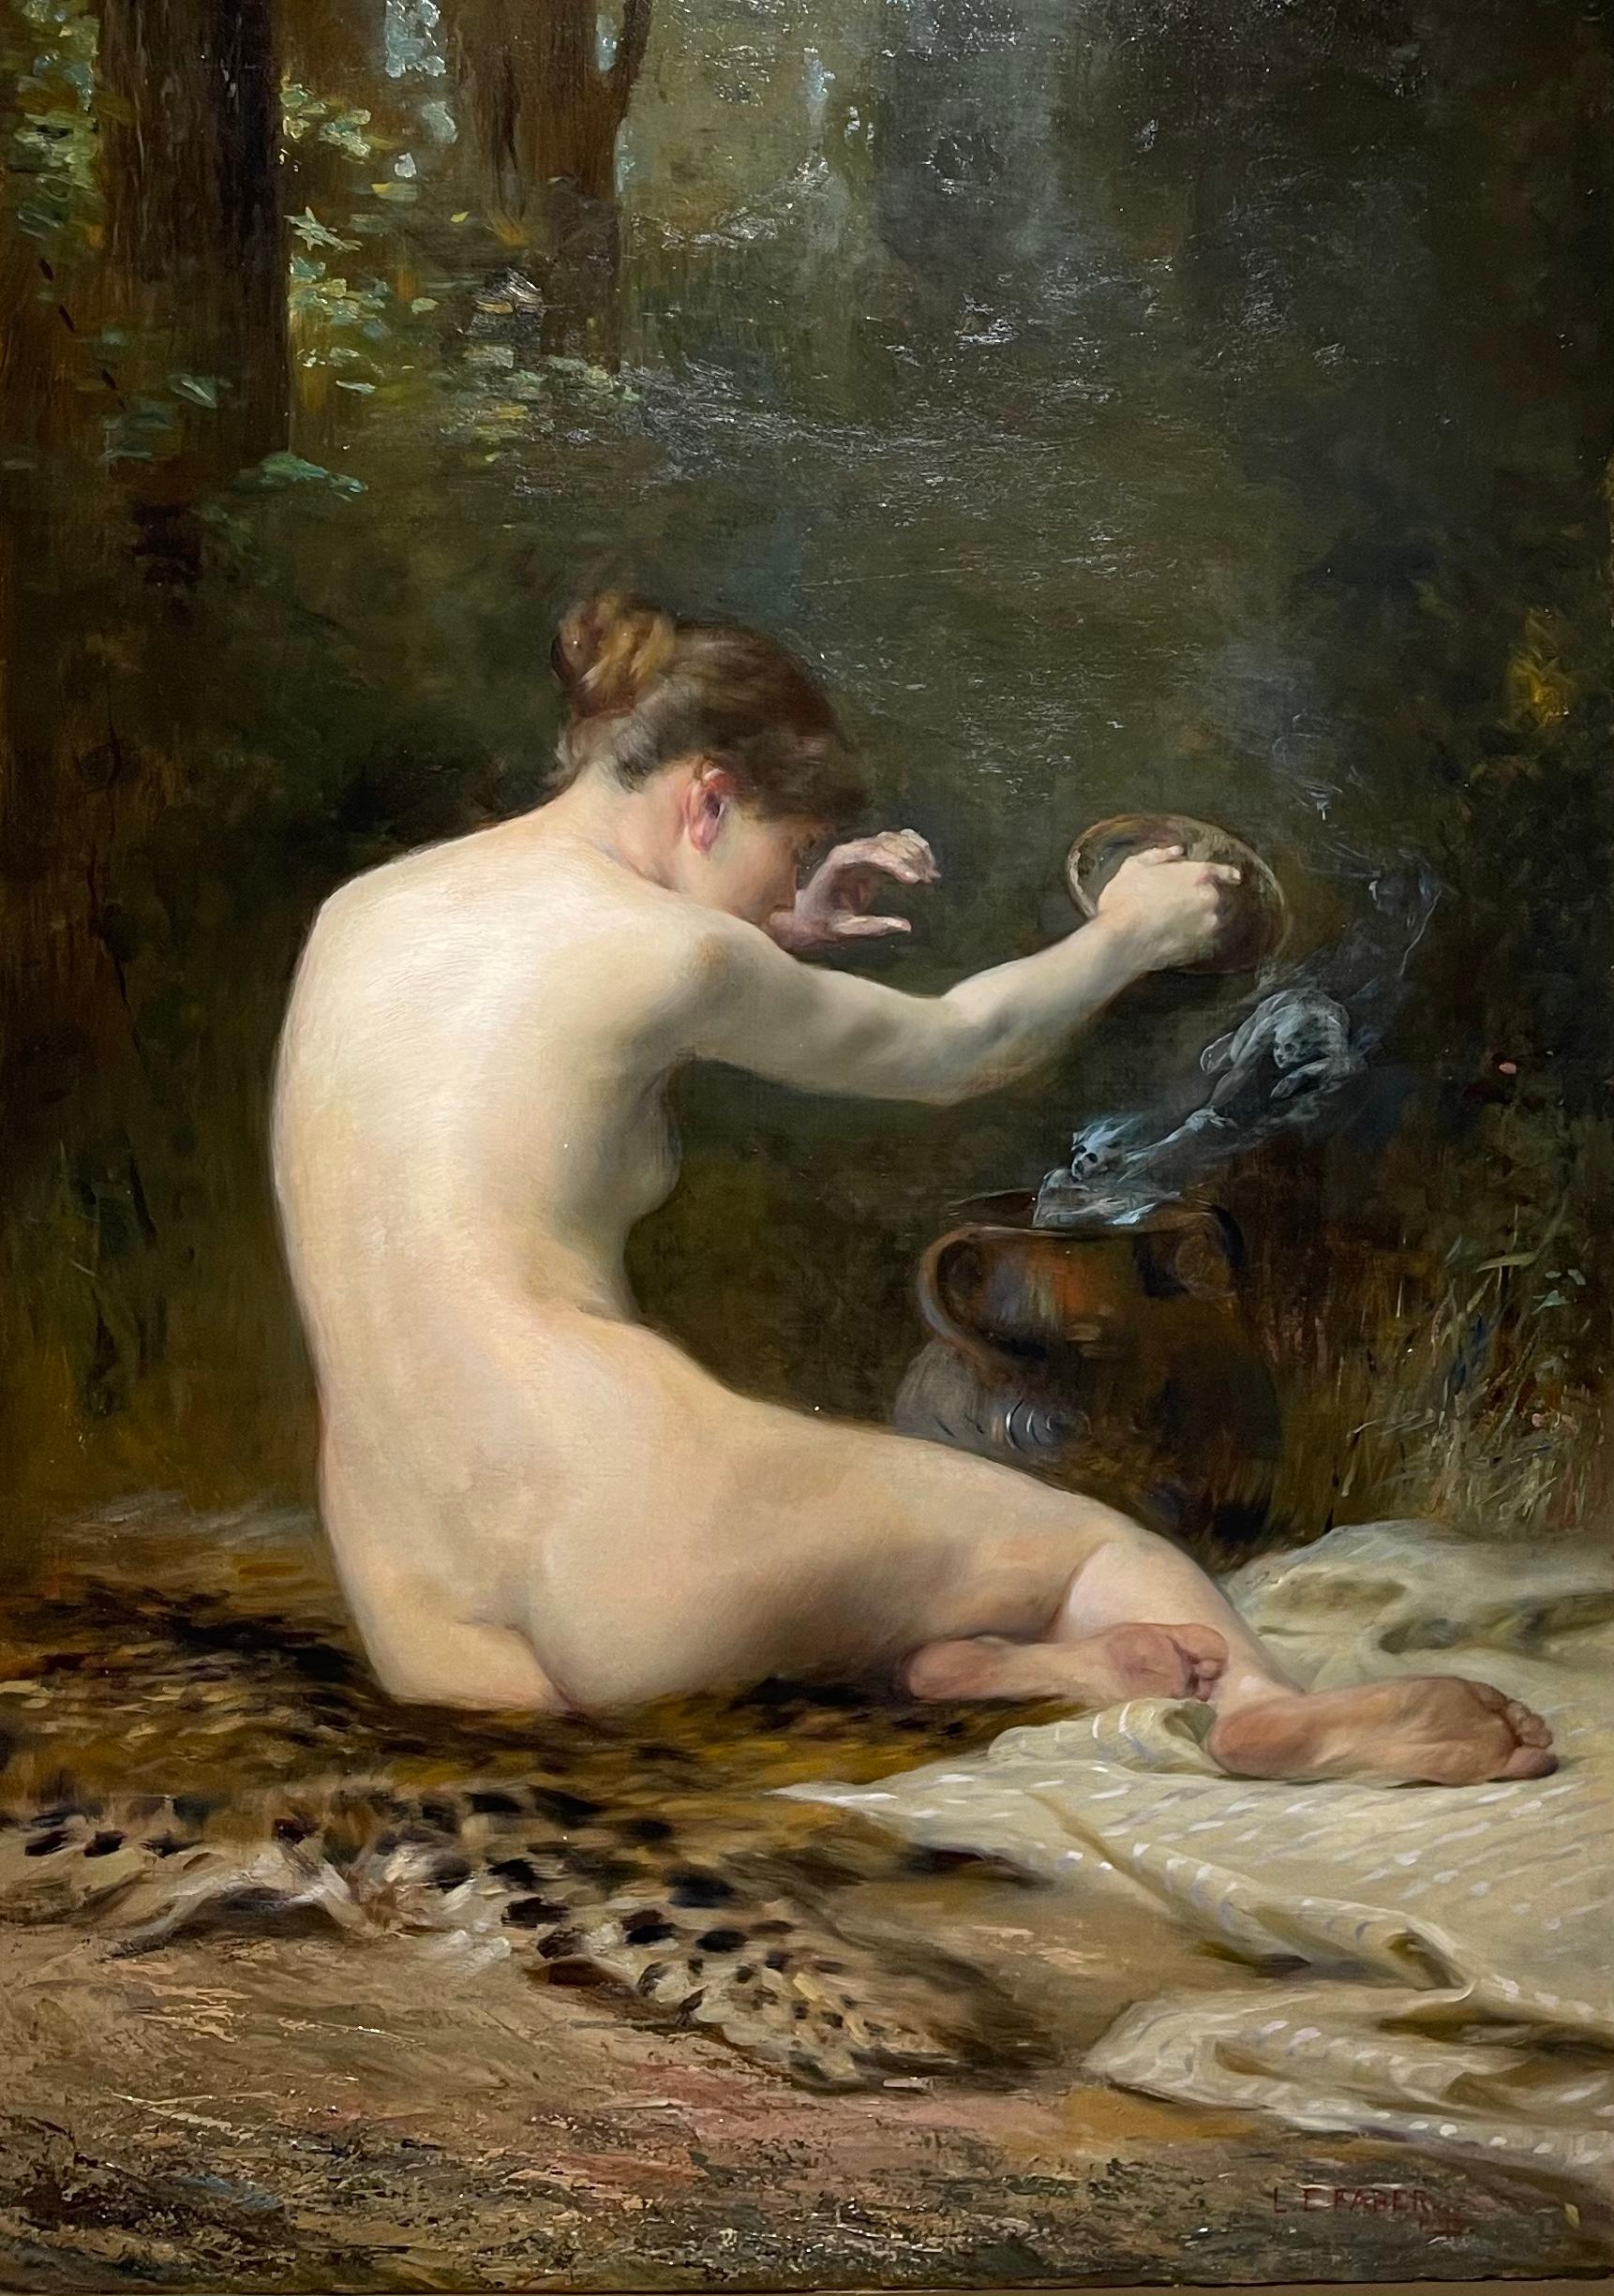 SPOOKY Antique PANDORAS BOX Female Academic Orientalist Mythological Nude Demons - Painting by Ludwig Ernest Faber